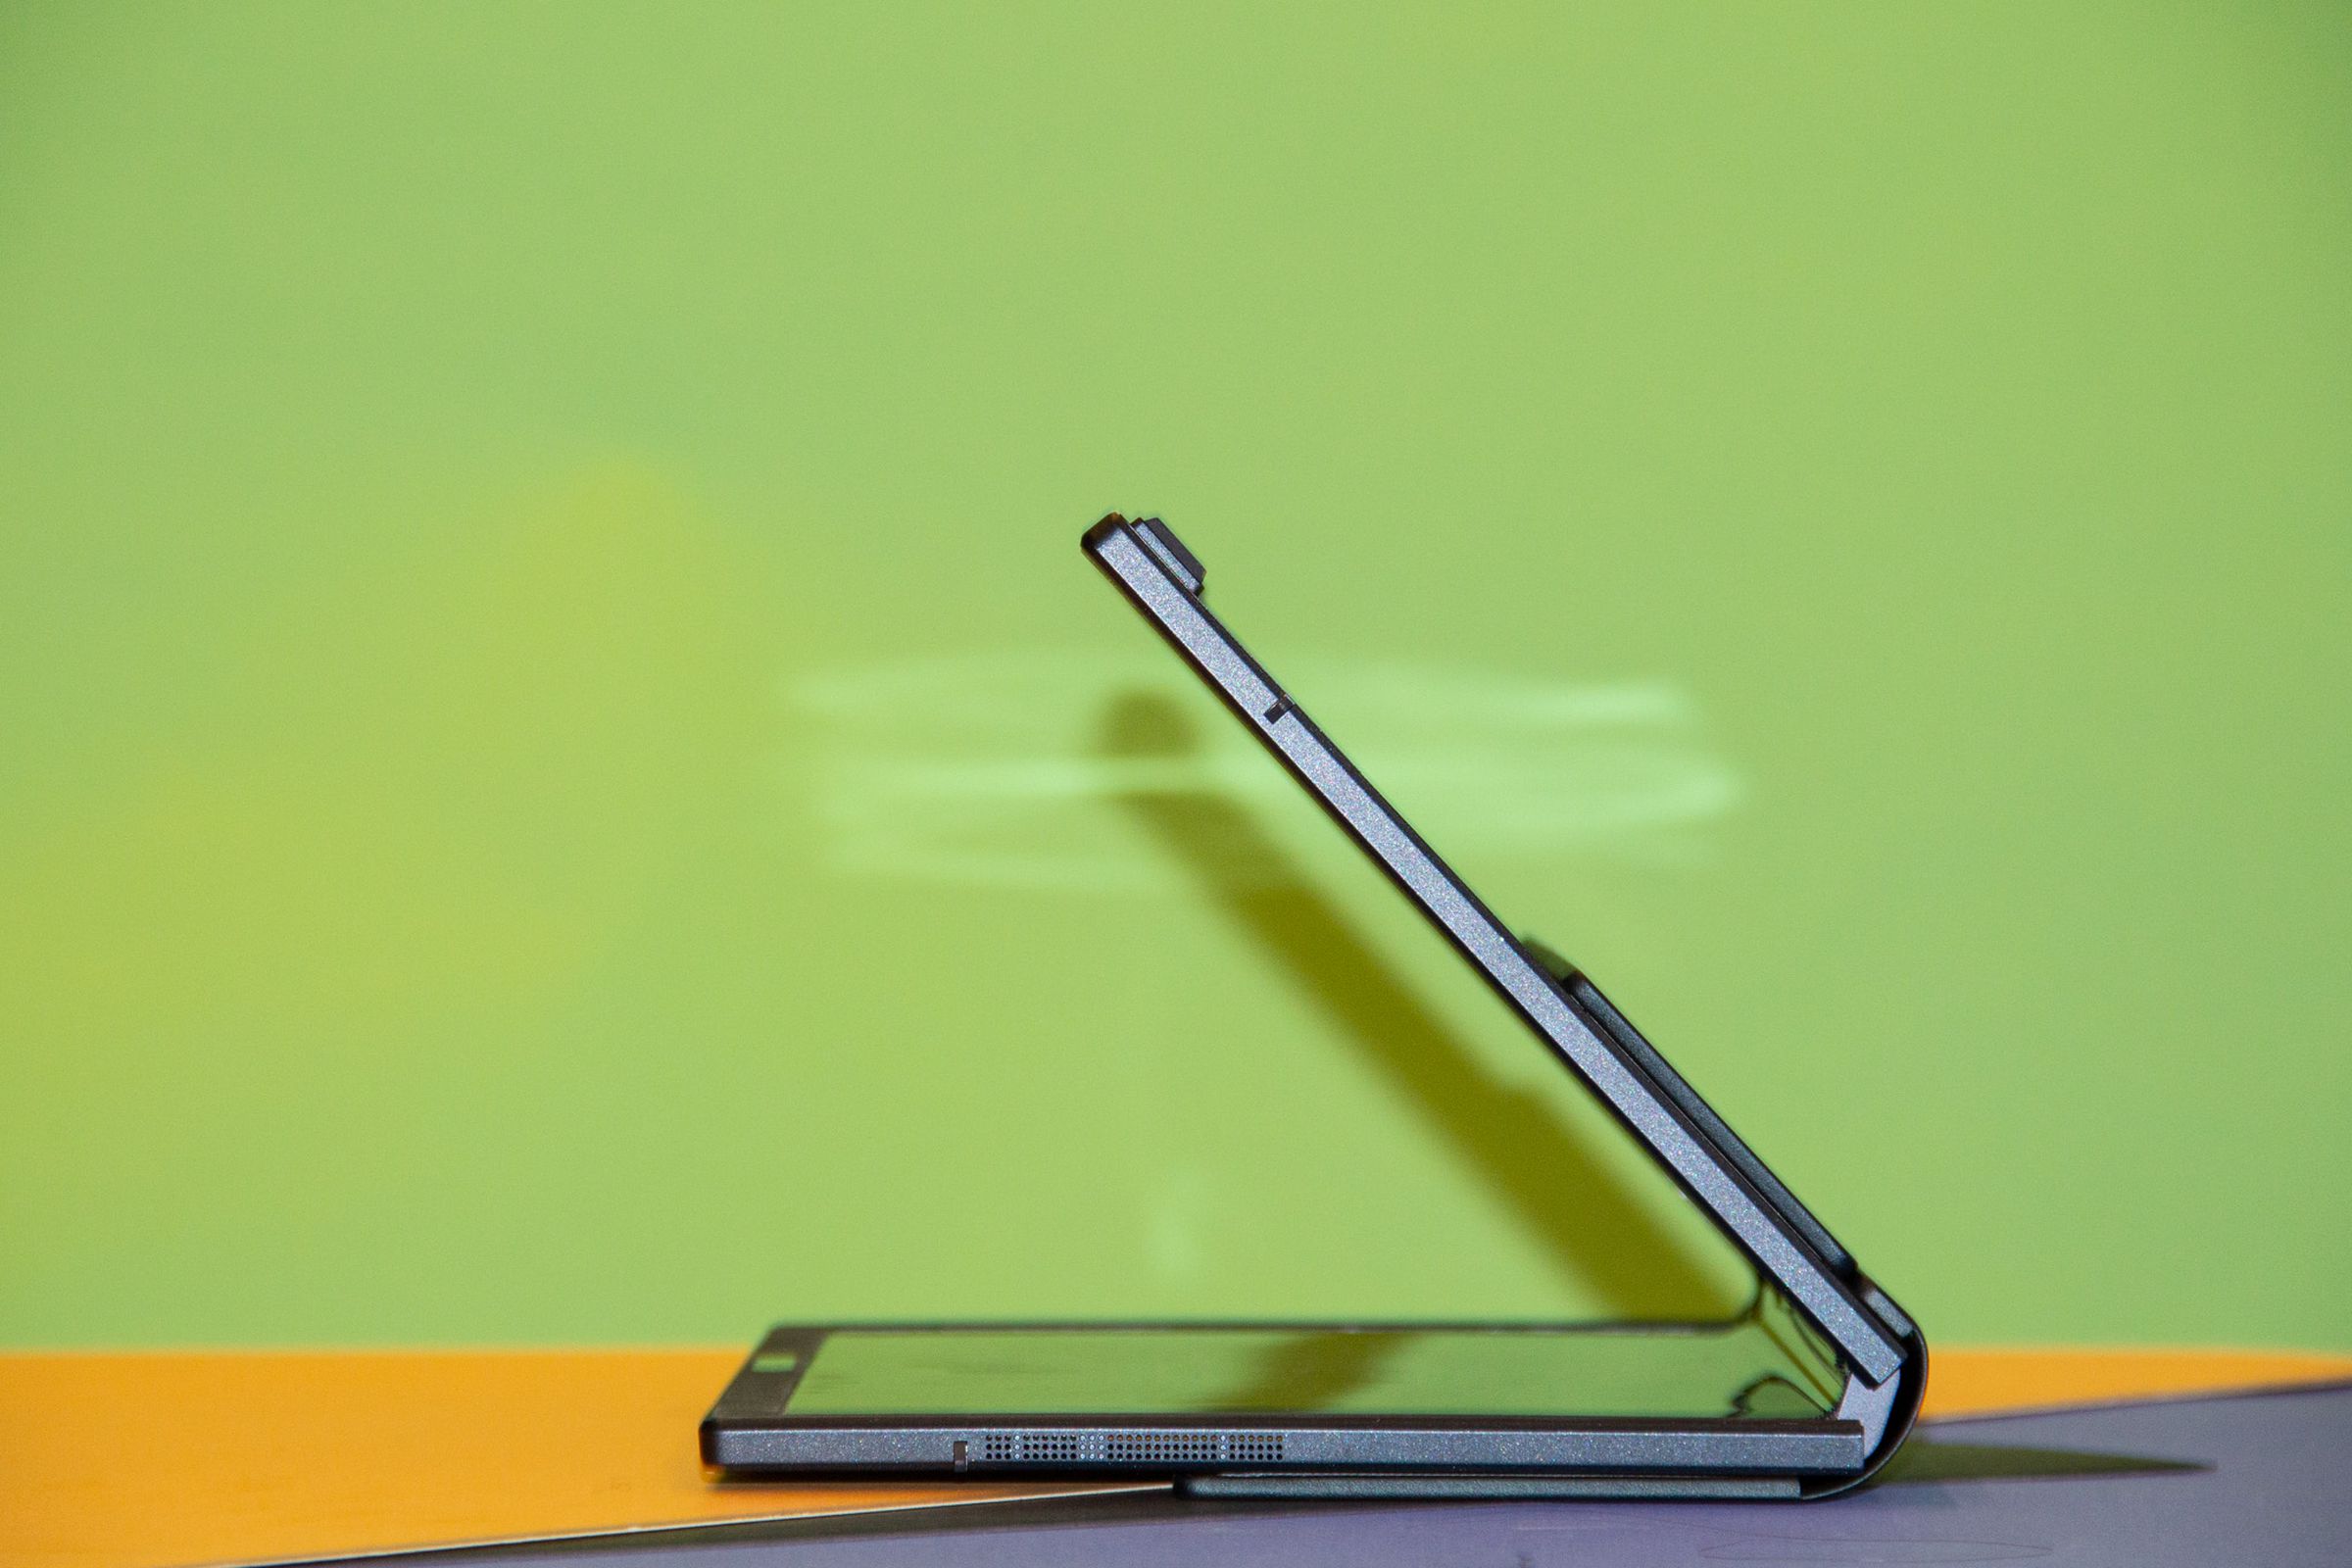 The Asus Zenbook 17 Fold OLED seen from the left side.